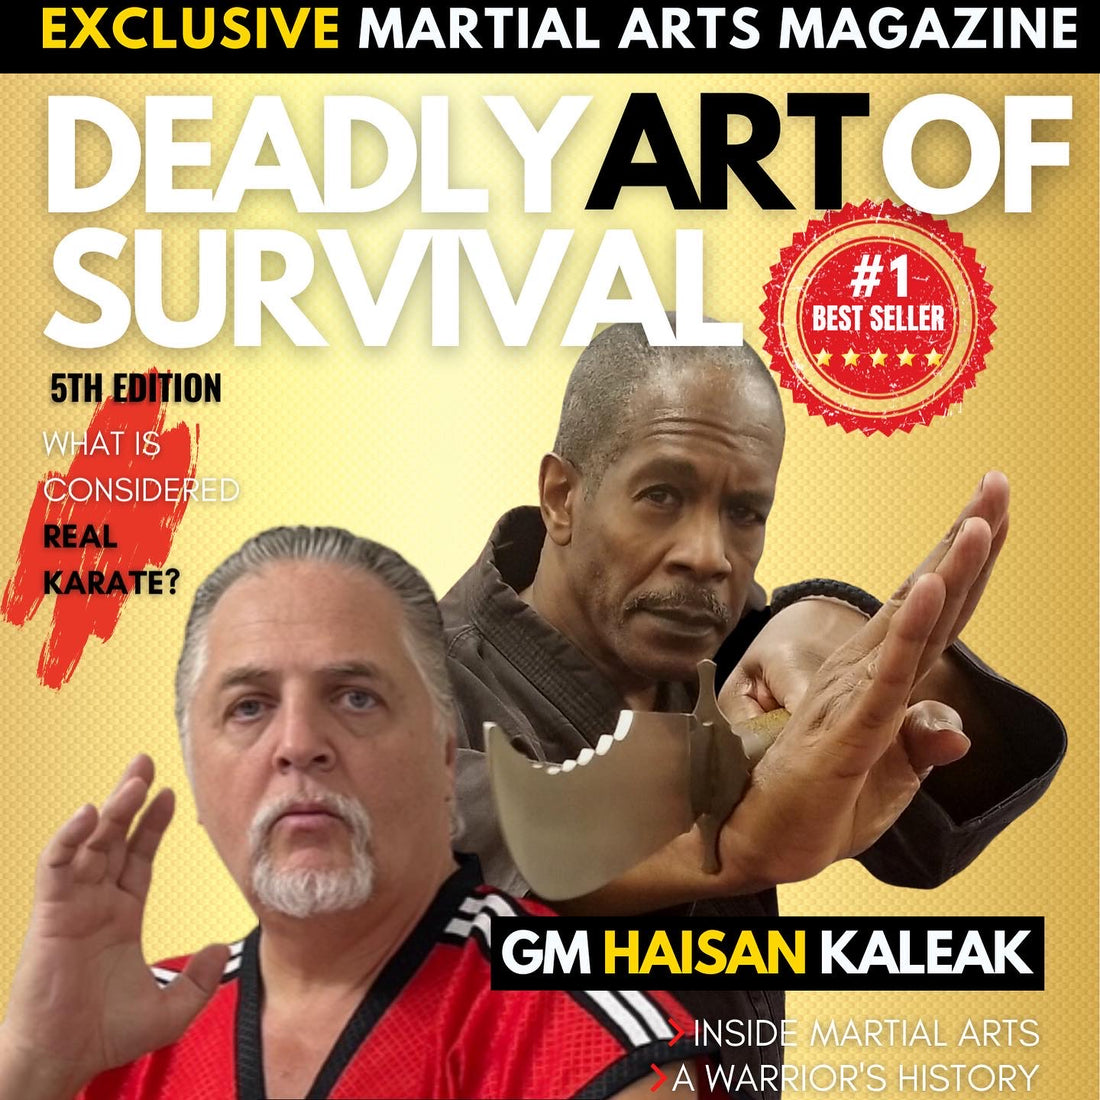 What Is Karate? Deadly Art of Survival Magazine